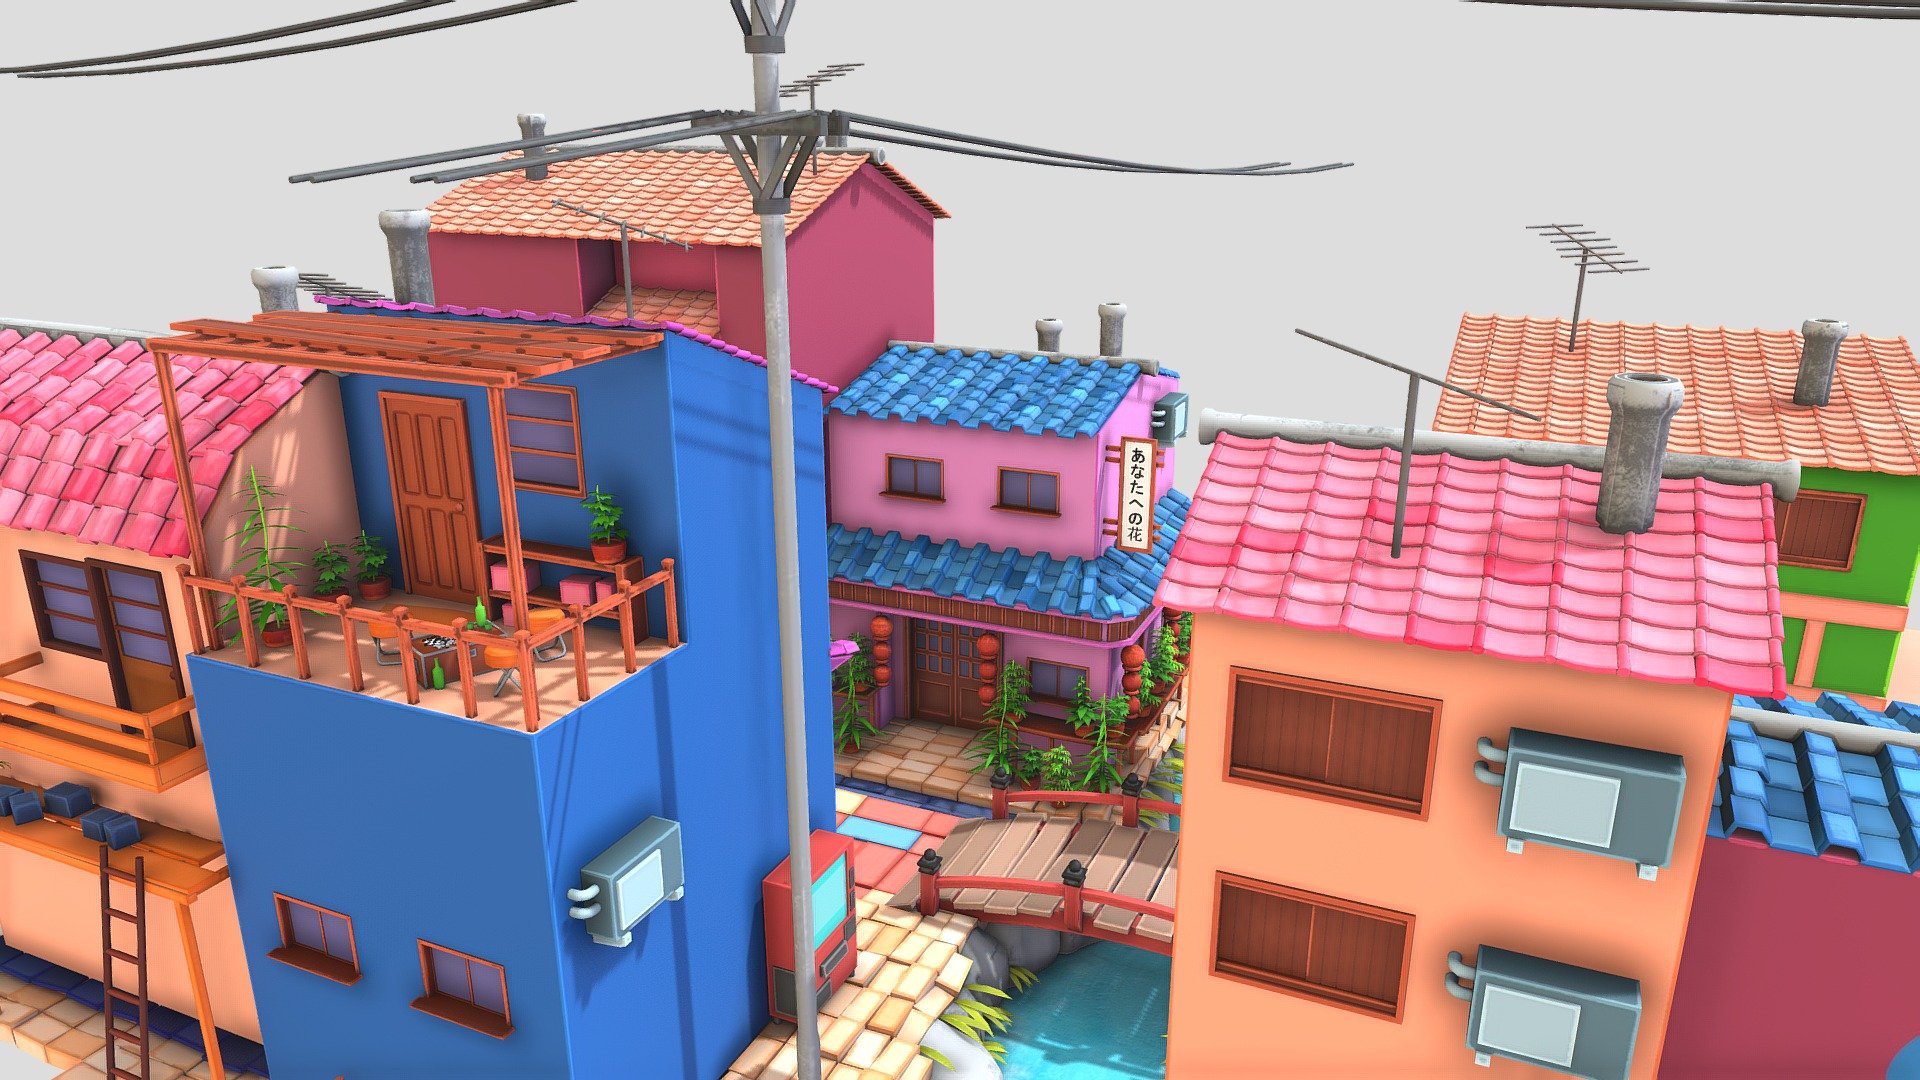 Hi! I made a colorful, stylized street in a Japanese town. Feel free to give me some feedback, I’d love to know what others think about my work 3d model